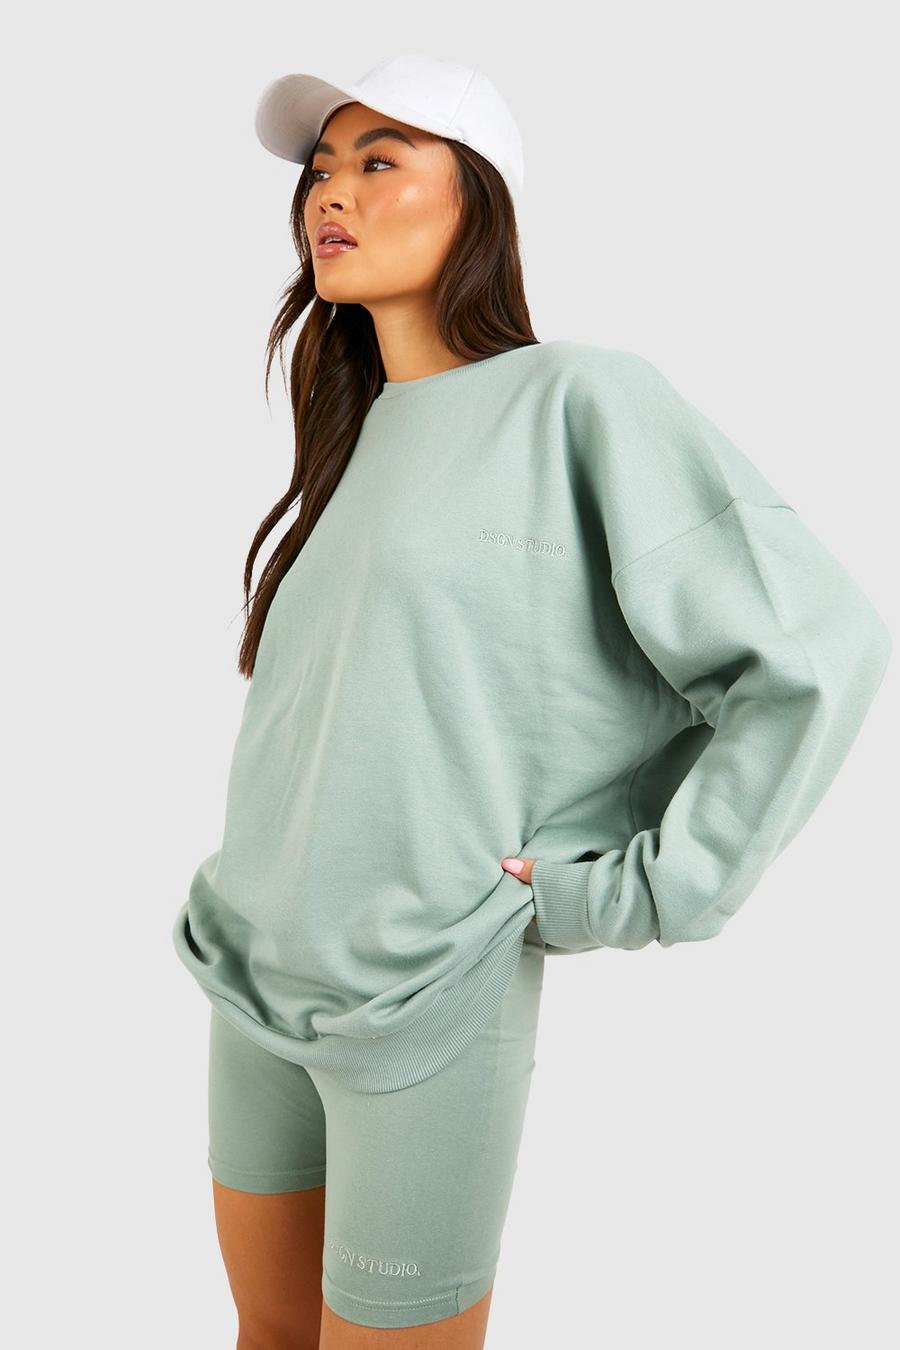 Sage Dsgn Studio Oversized Sweater And Cycling Short Set 